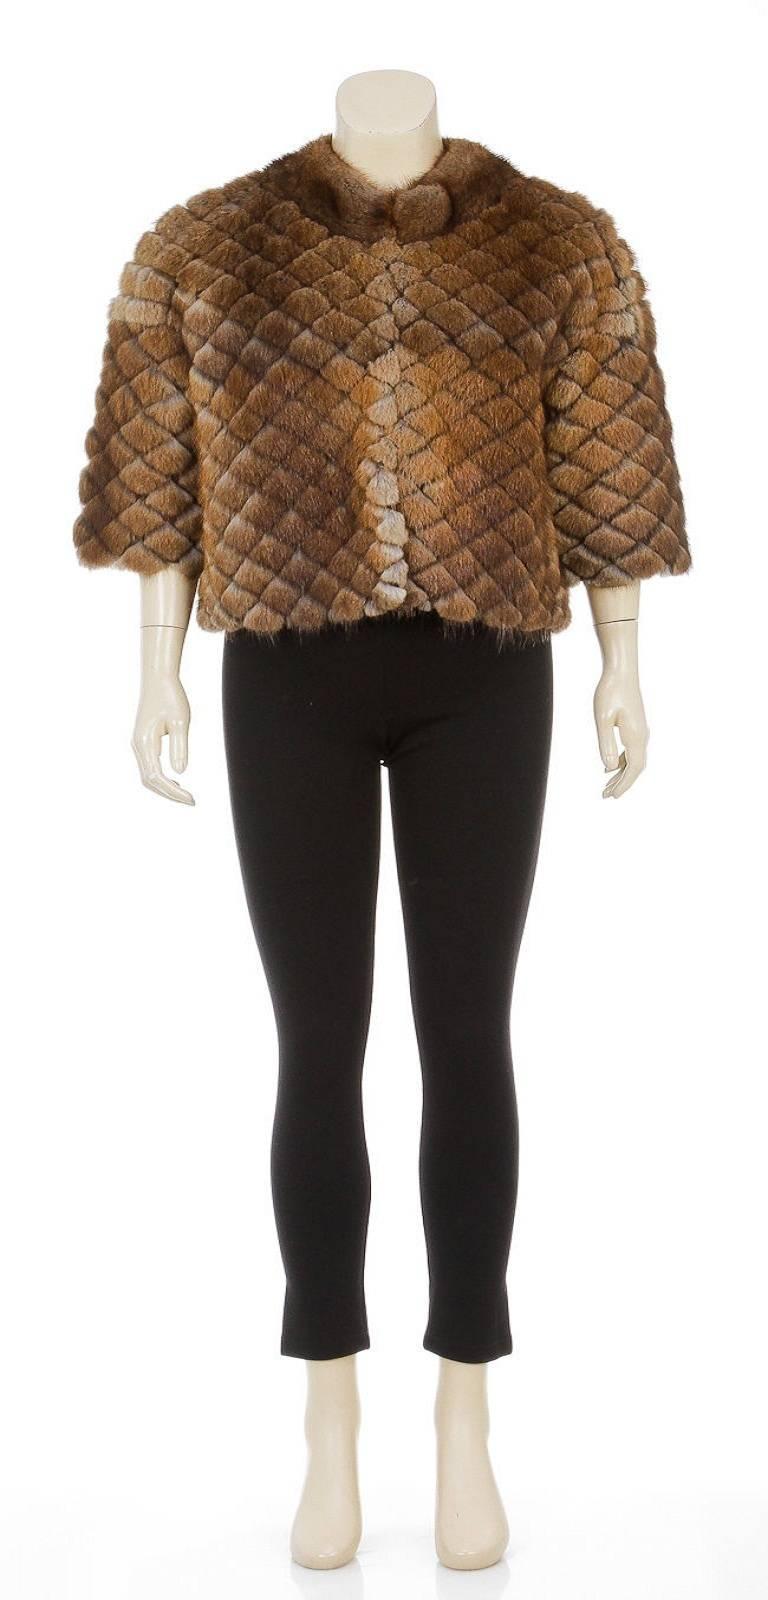 lip in luxury with this J. Mendel fur jacket! This gorgeous is crafted from ultra glamorous muskrat fur and can definitely become your new go-to piece this upcoming fall and winter. Hook and eye closures are available to secure this jacket closed.